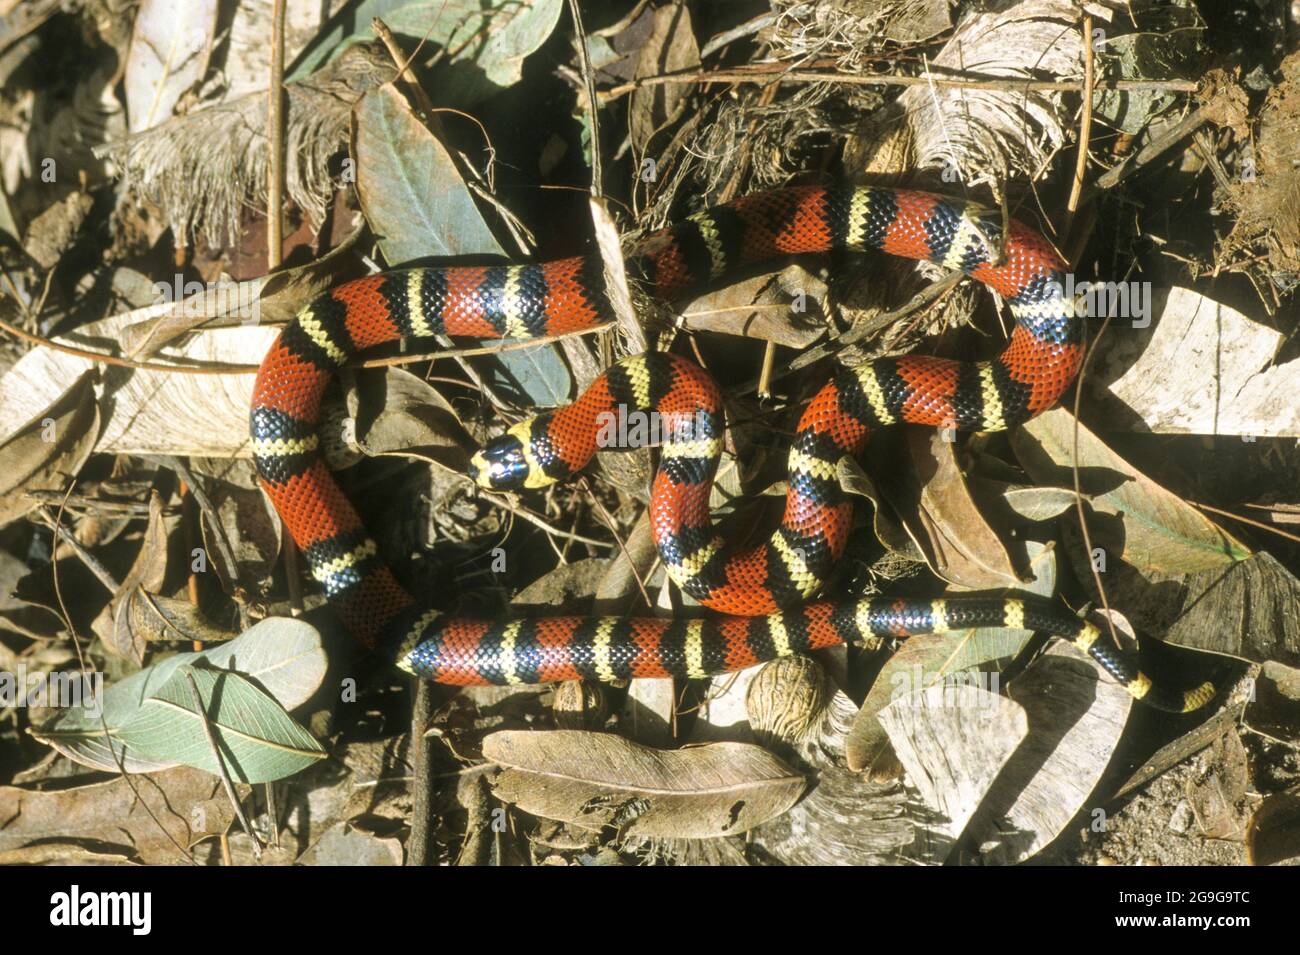 Kingsnakes are colubrid New World members of the genus Lampropeltis, which includes milk snakes and four other species. Among these, about 45 subspeci Stock Photo